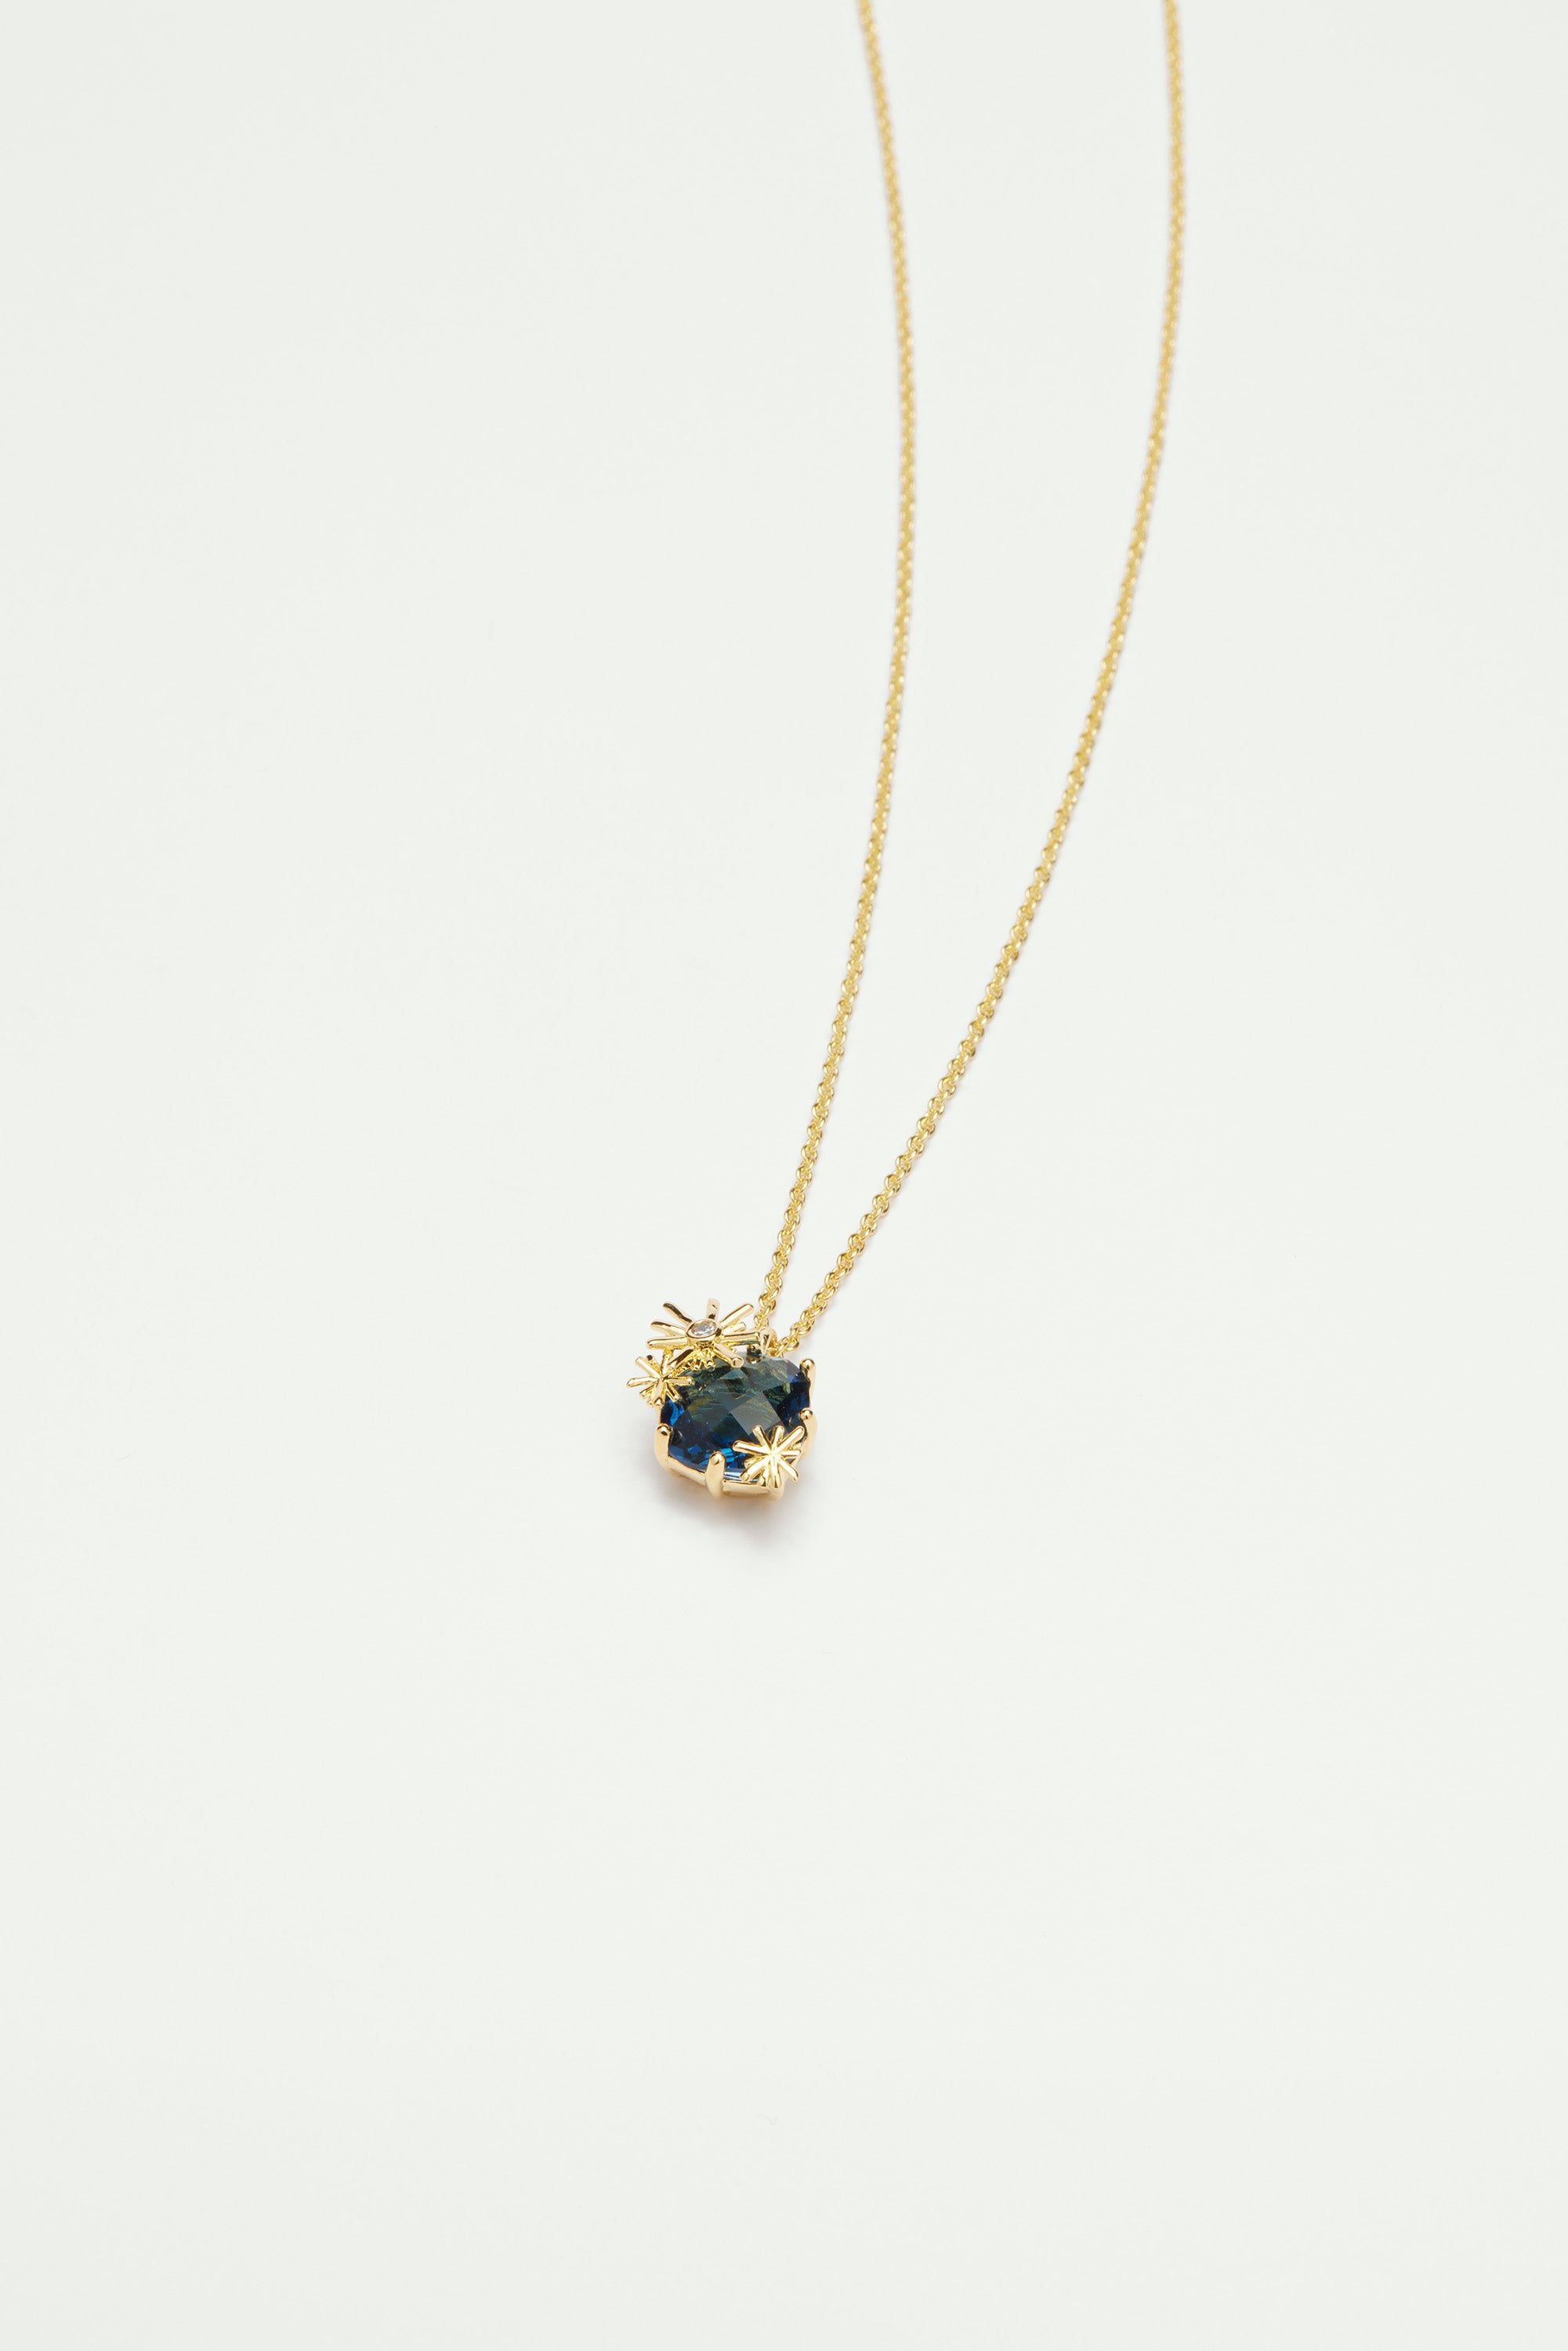 Gold stars and square stone pendant necklace